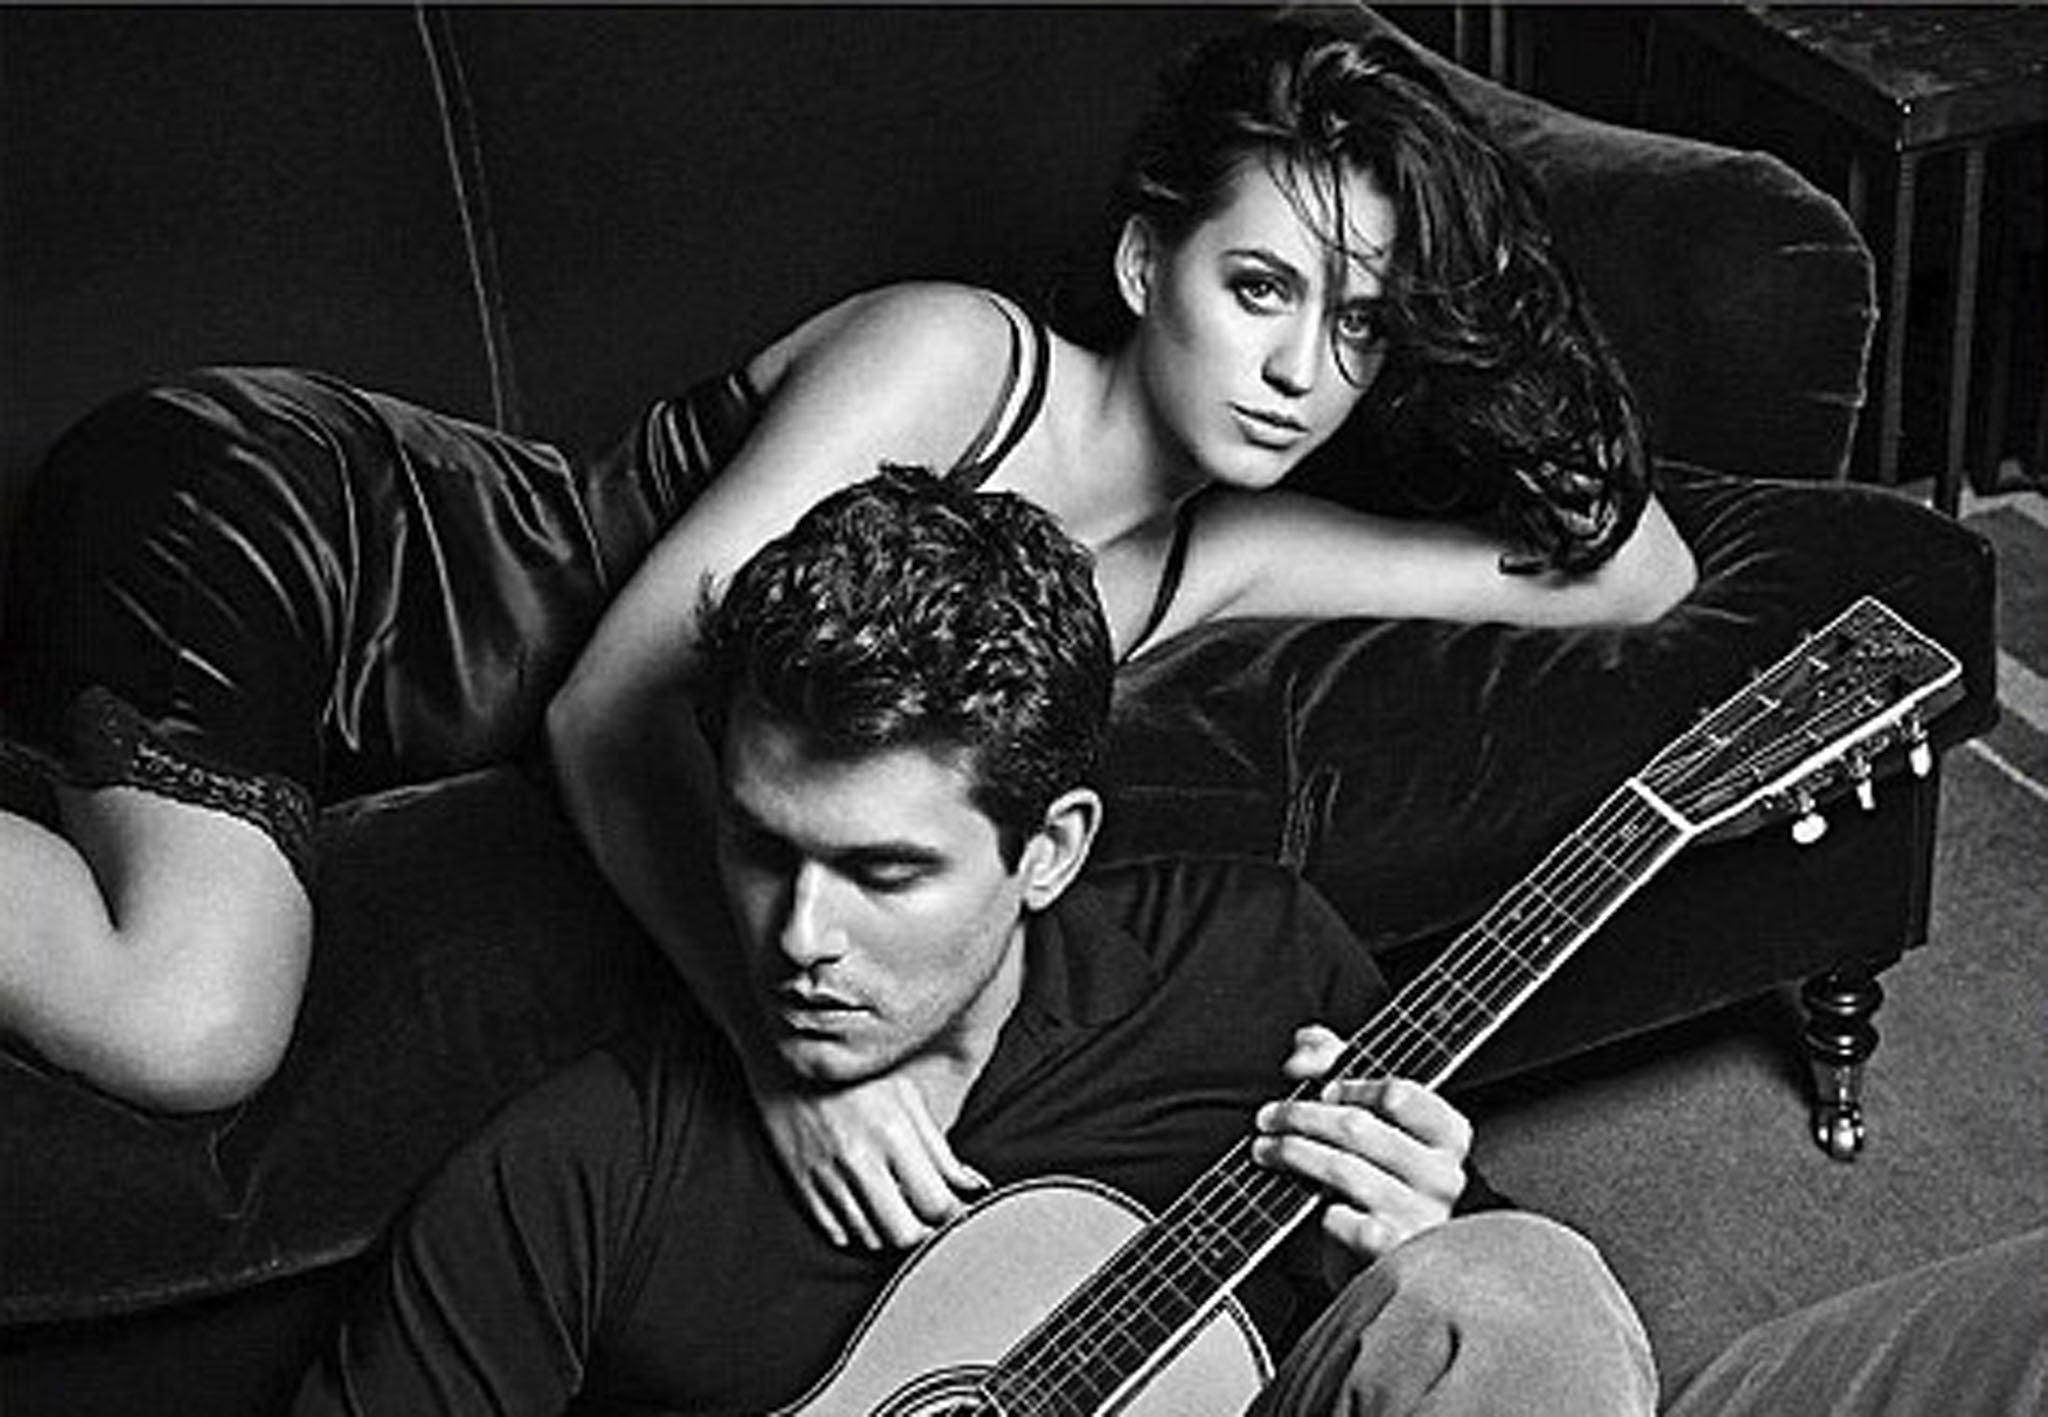 Katy Perry and John Mayer pose on the cover of their new single